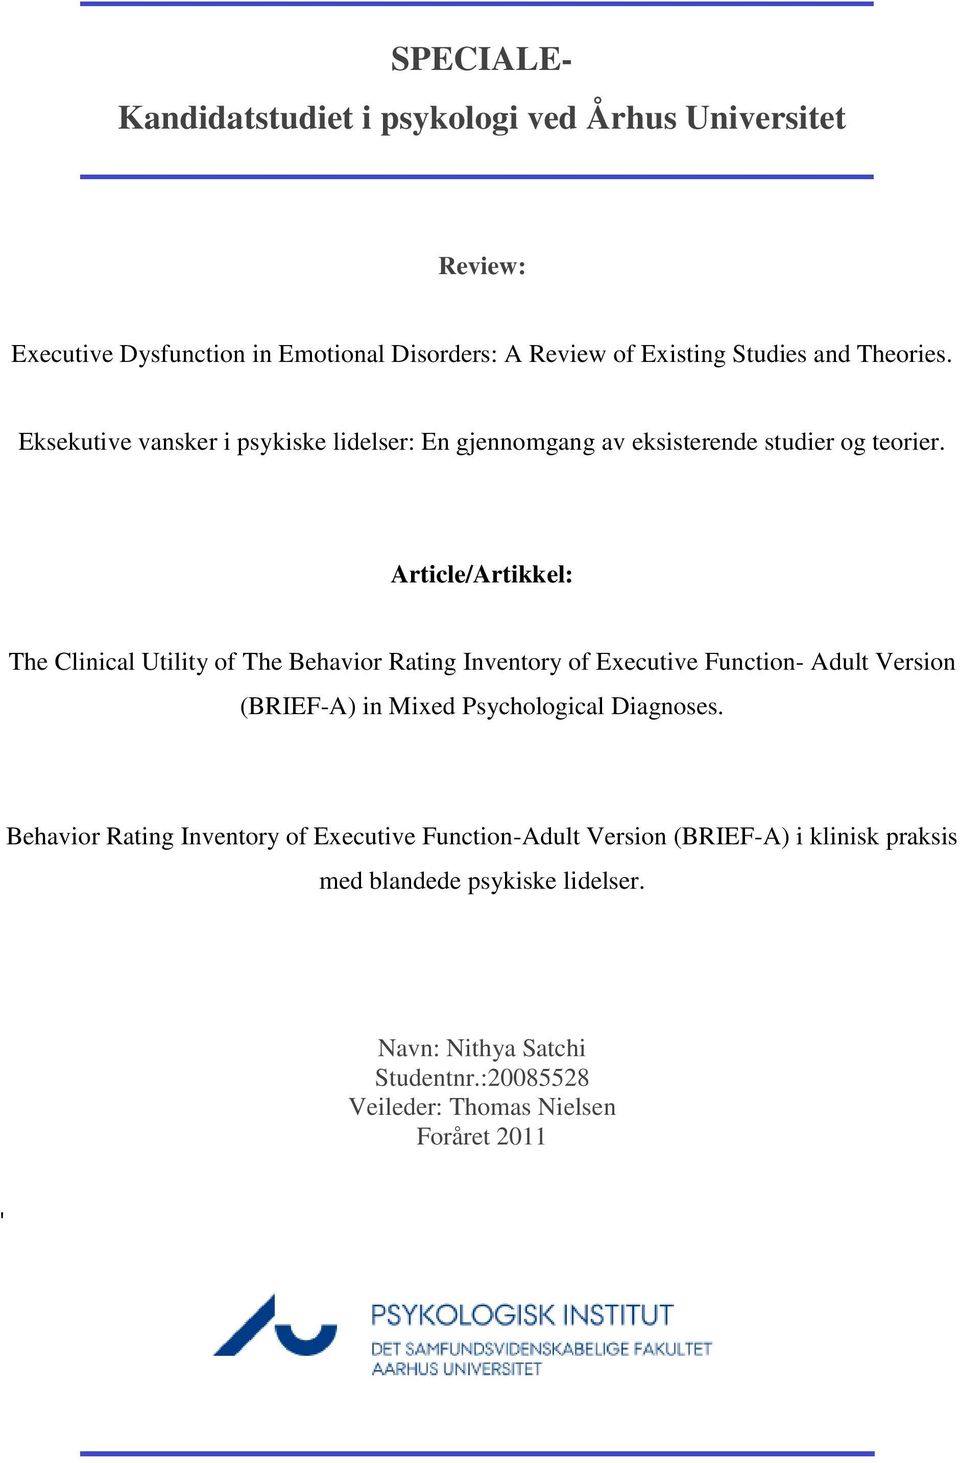 Article/Artikkel: The Clinical Utility of The Behavior Rating Inventory of Executive Function- Adult Version (BRIEF-A) in Mixed Psychological